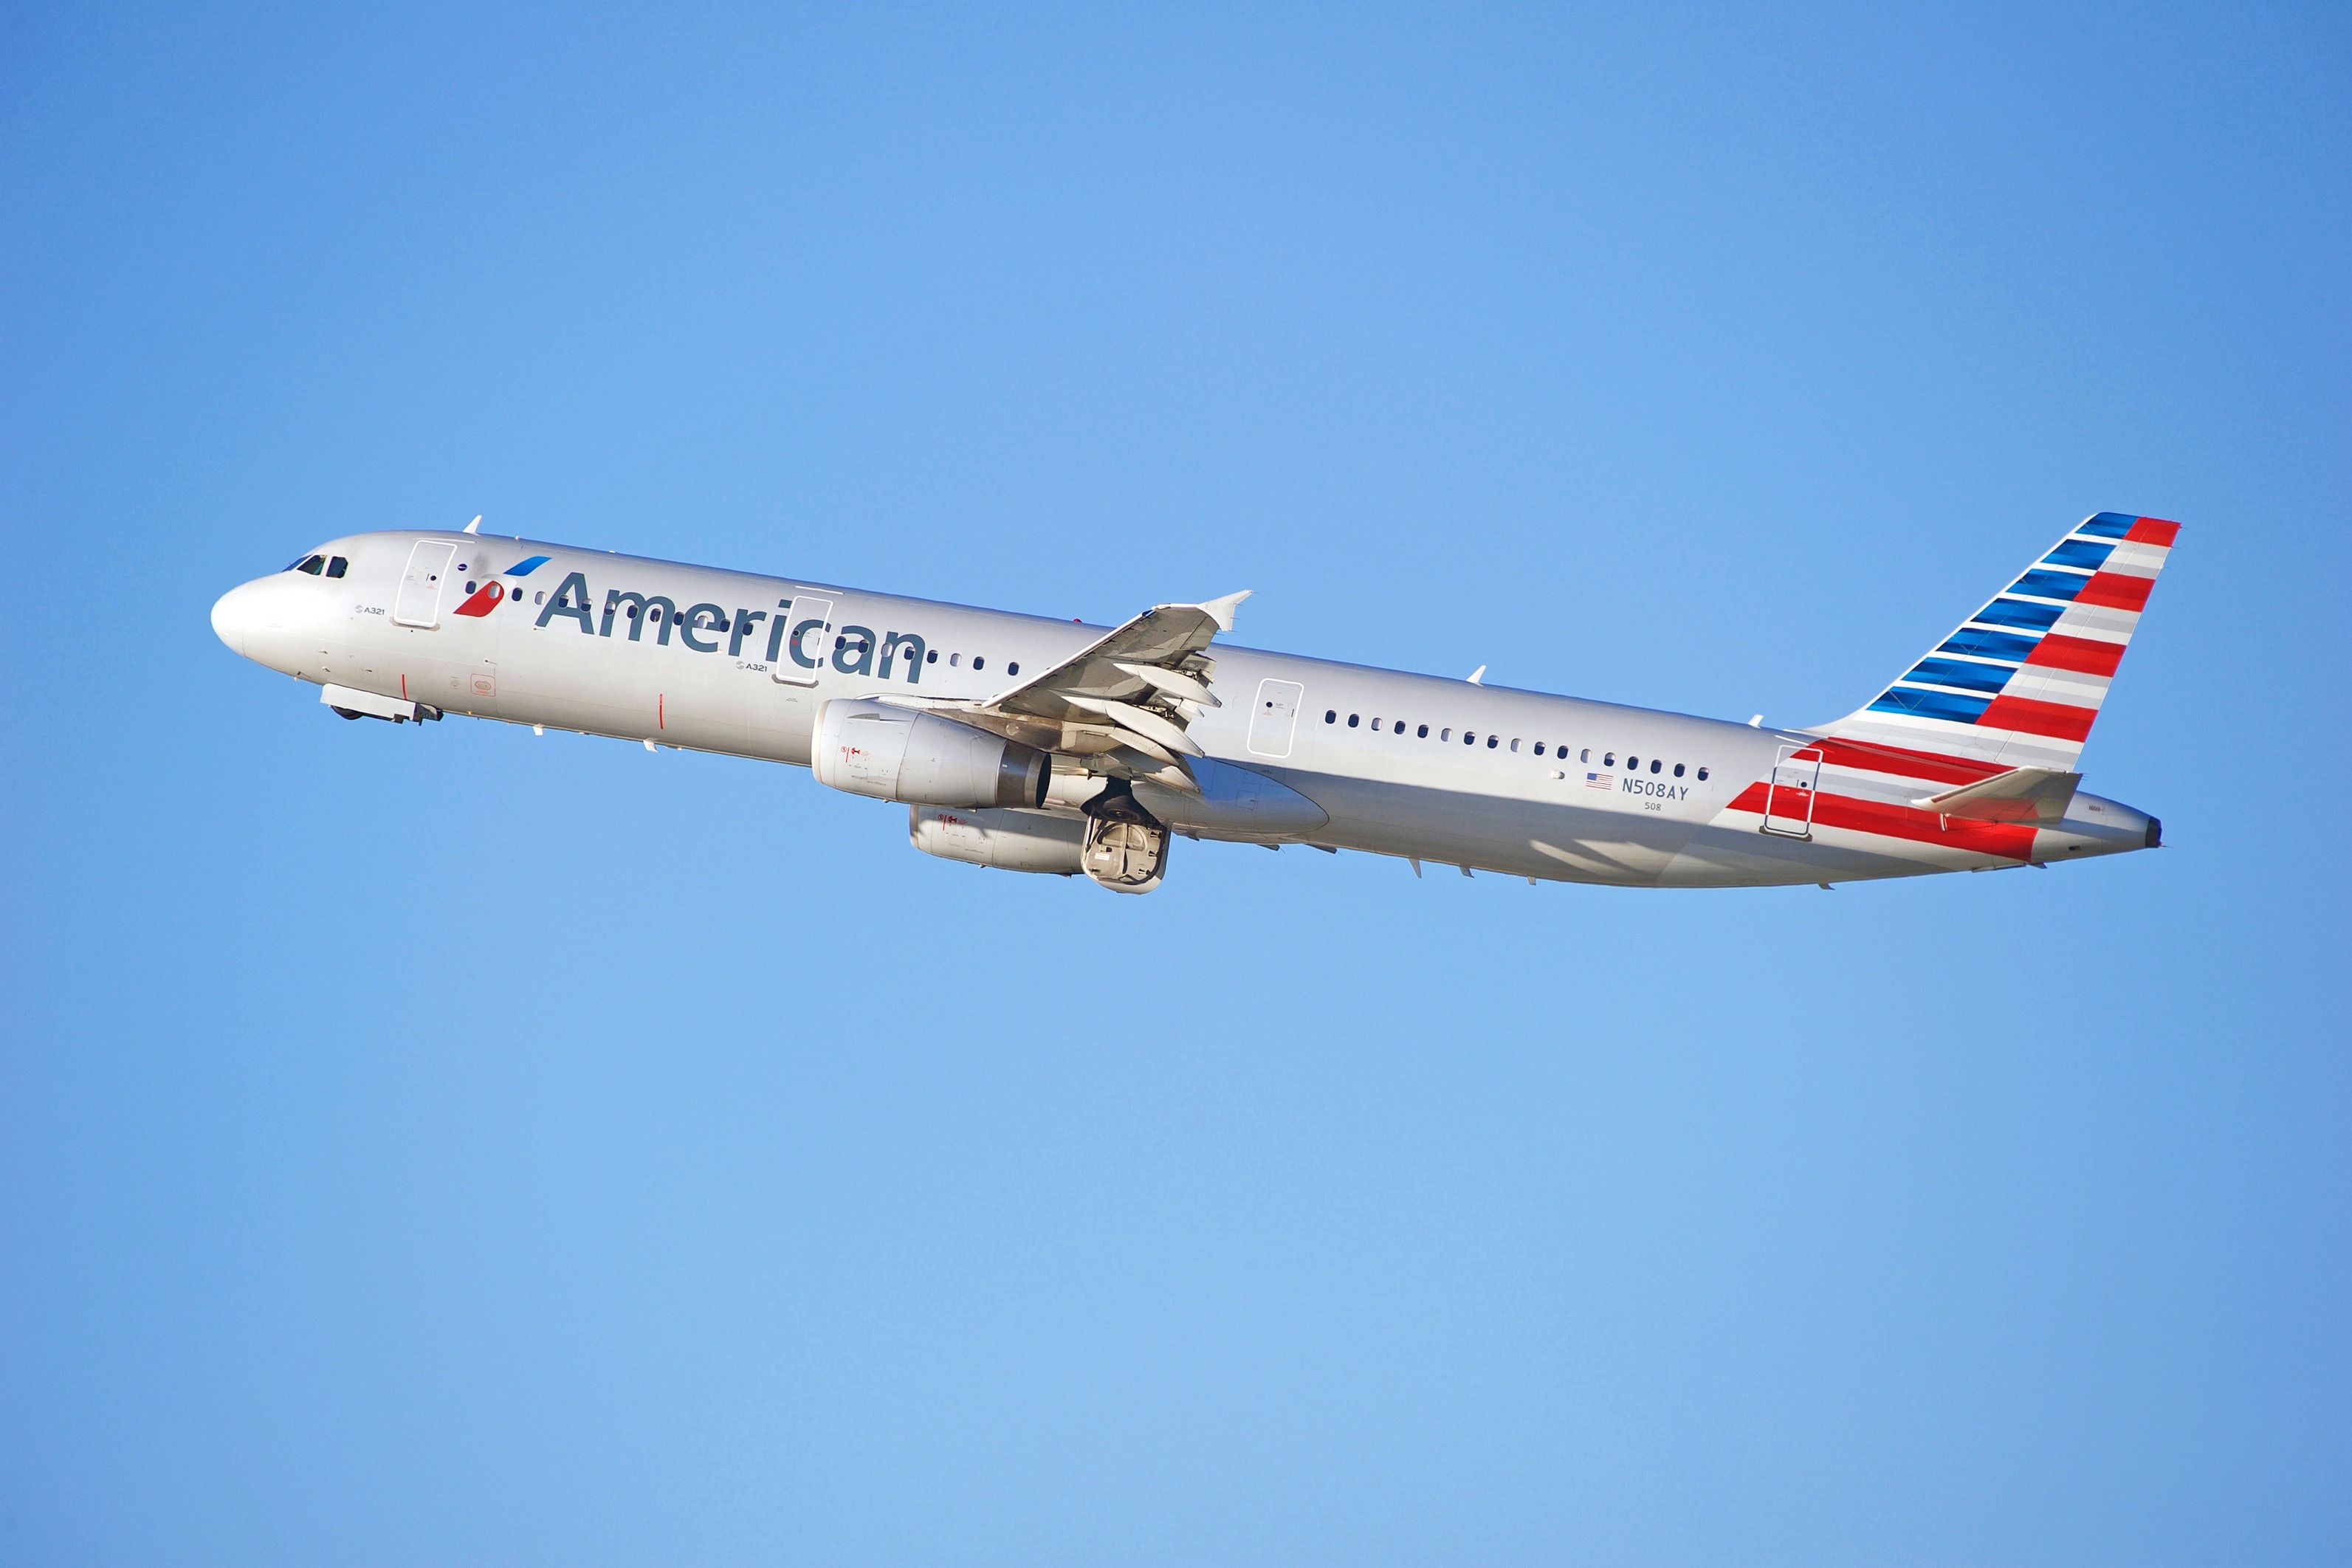 American Airlines Airbus A321ceo departing LAX shutterstock_593002394